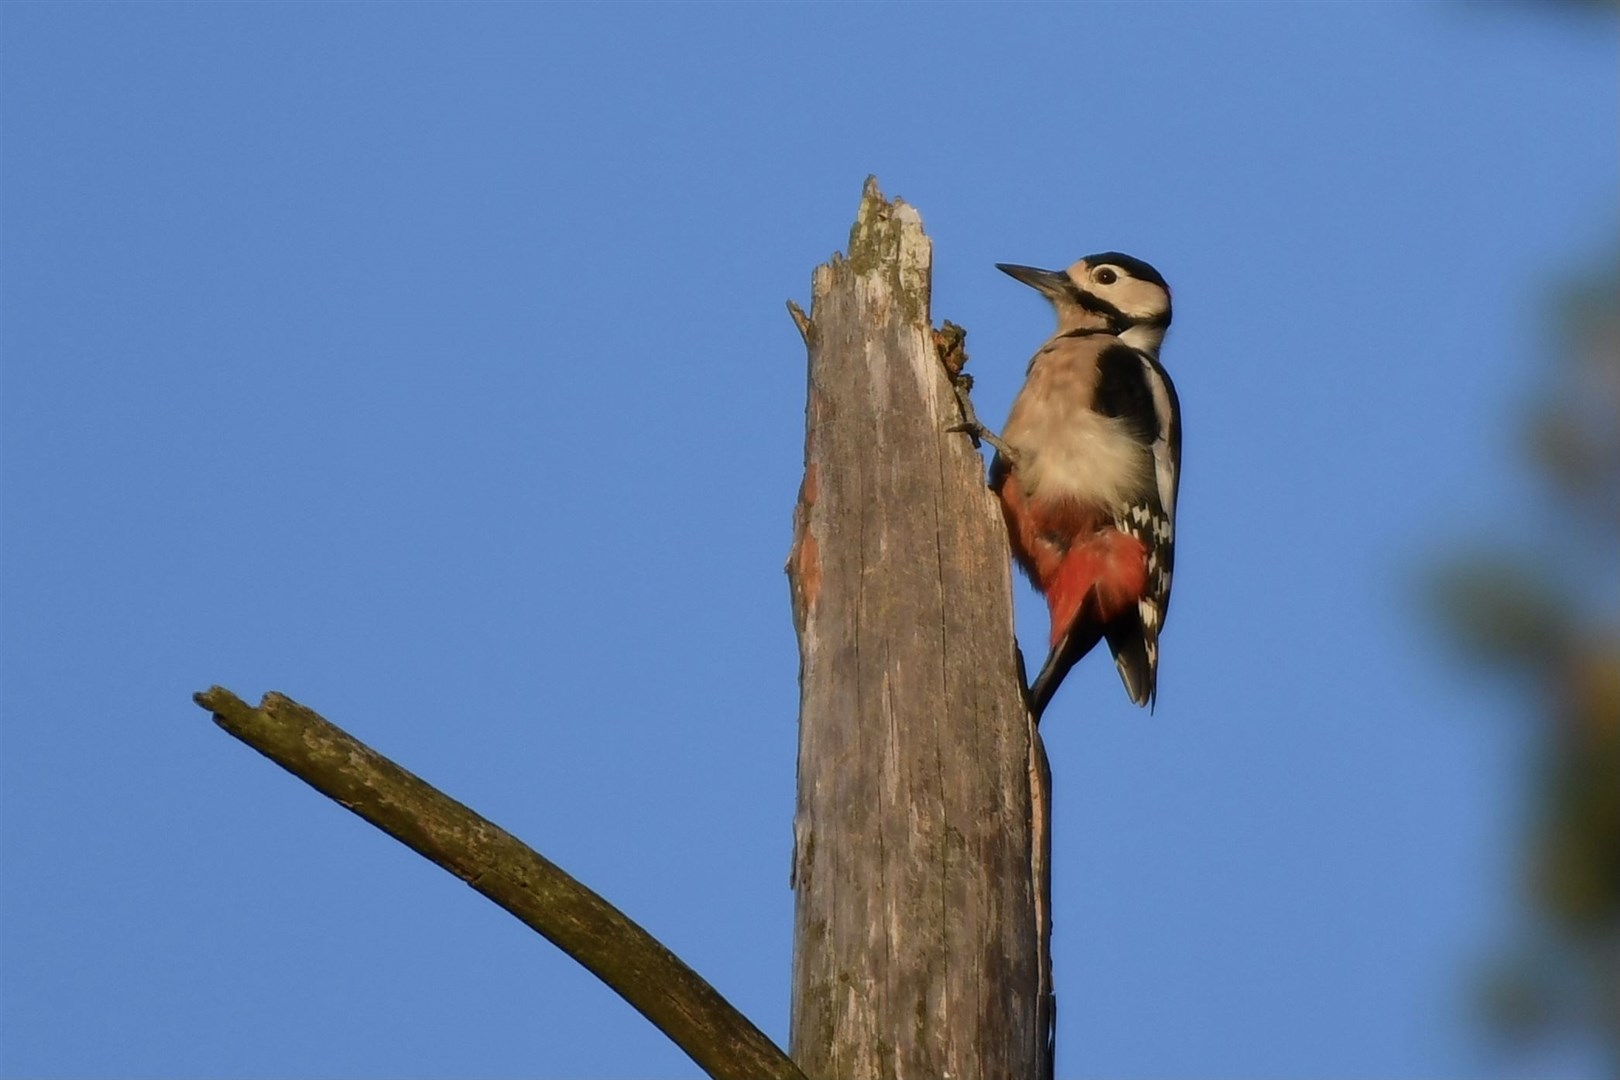 Reader Hazel Thomson noticed this spotted woodpecker while on a walk through Spynie Bird Hide.